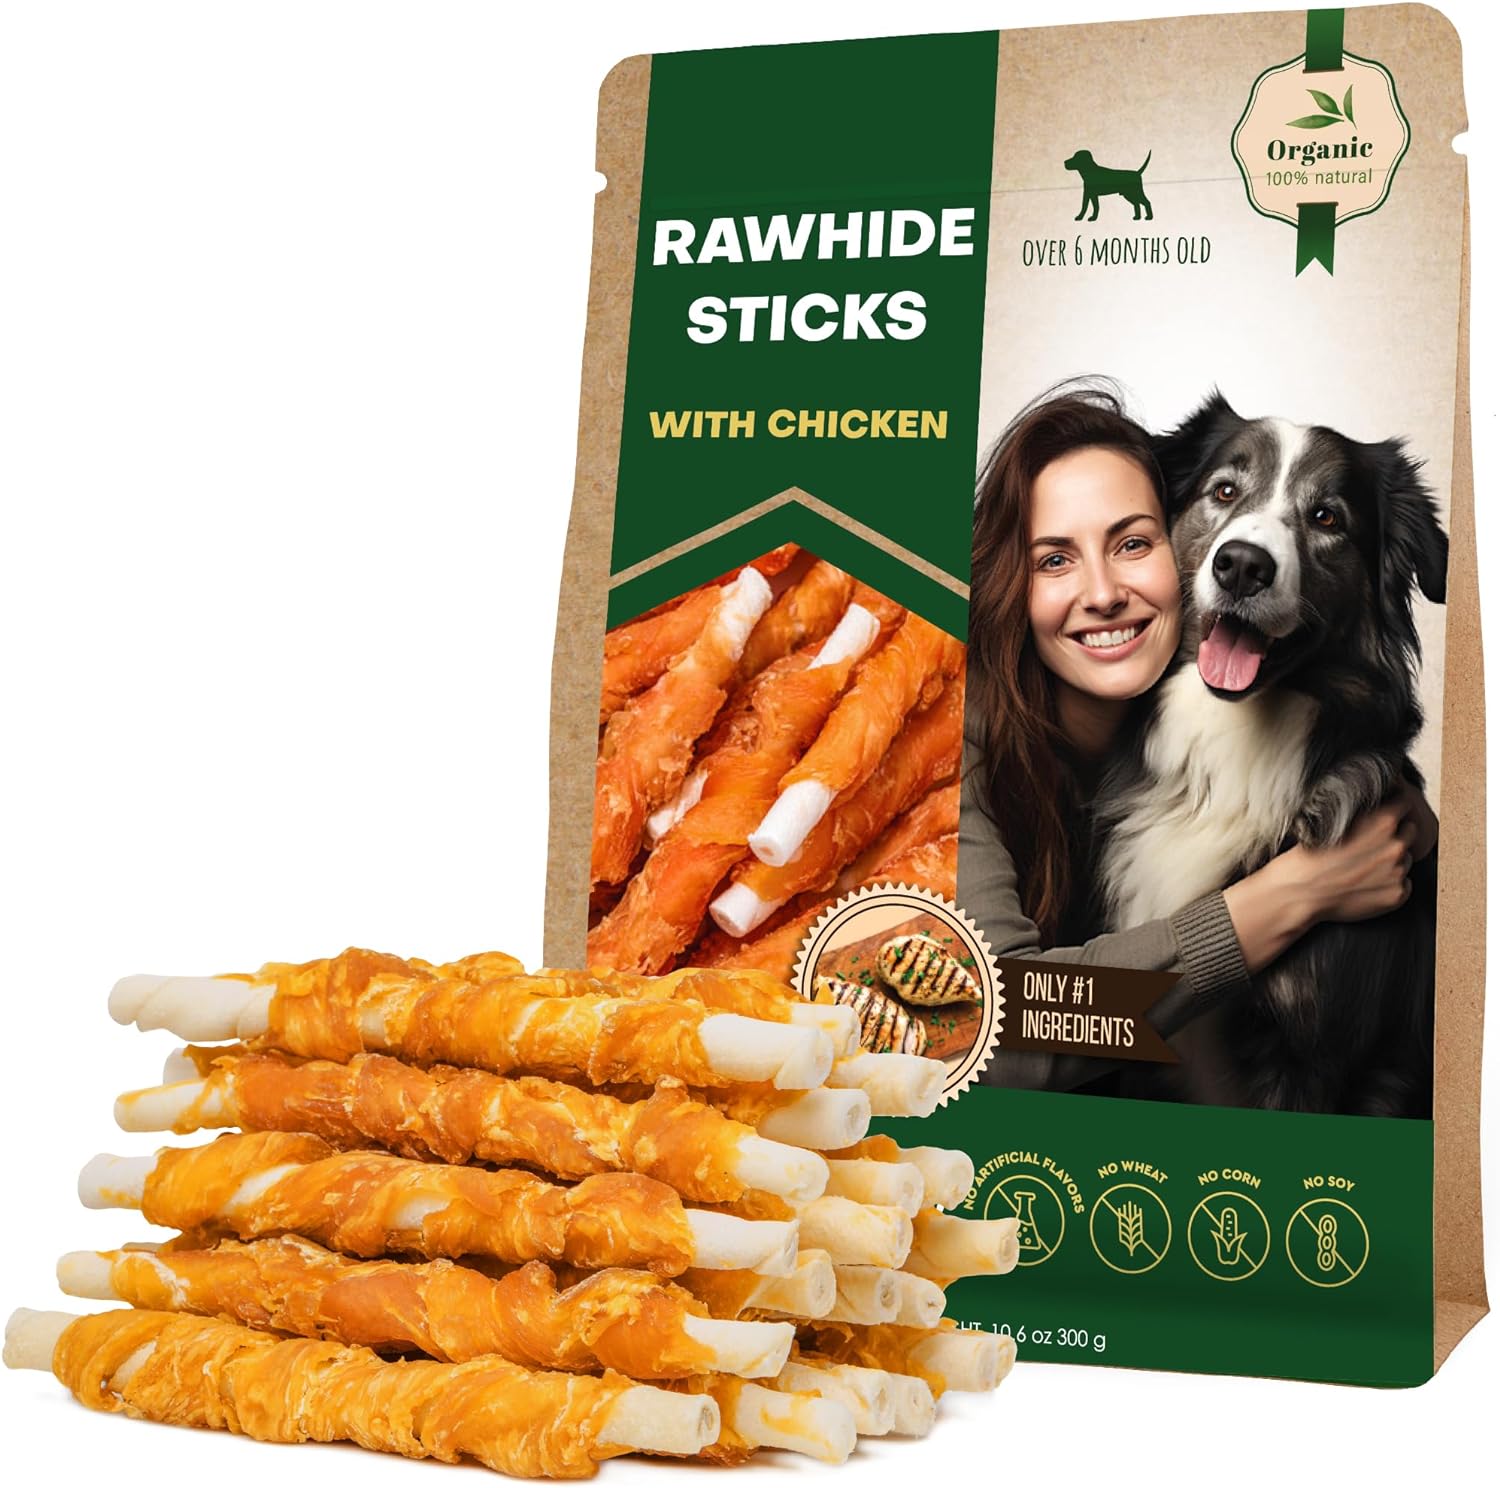 Dog Rawhide Sticks Wrapped with Chicken & Pet Natural Chew Treats - Grain Free Organic Meat & Human Grade Dried Snacks in Bulk - Best Twists for Training Small & Large Dogs - Made for USA (Sticks)